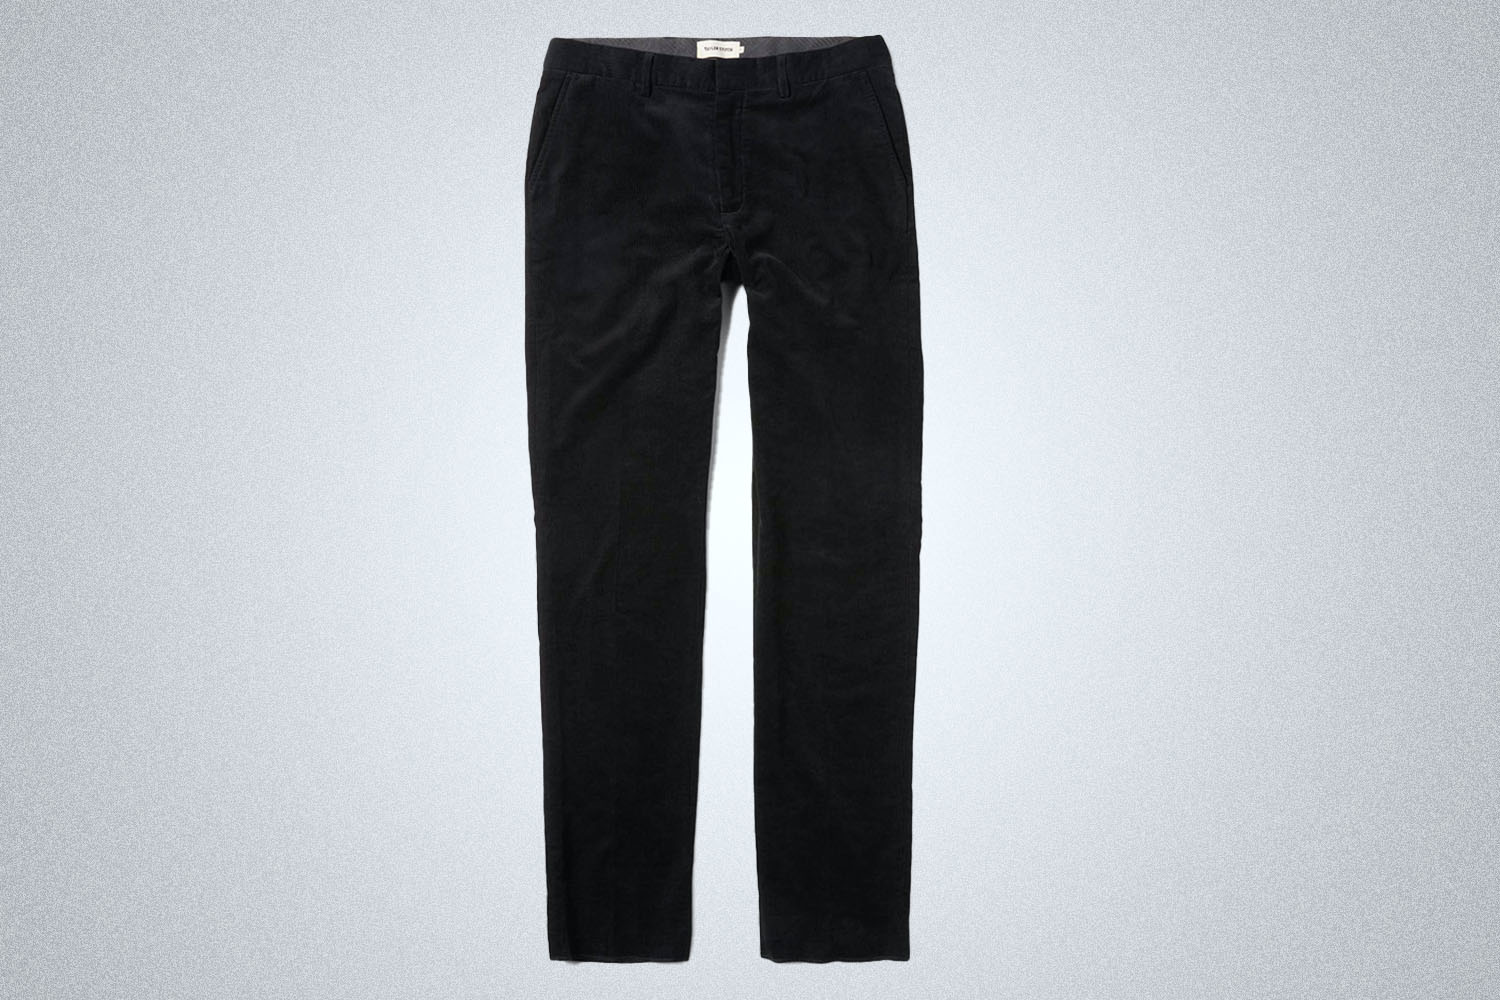 a pair of navy dress pants in a subtle cord